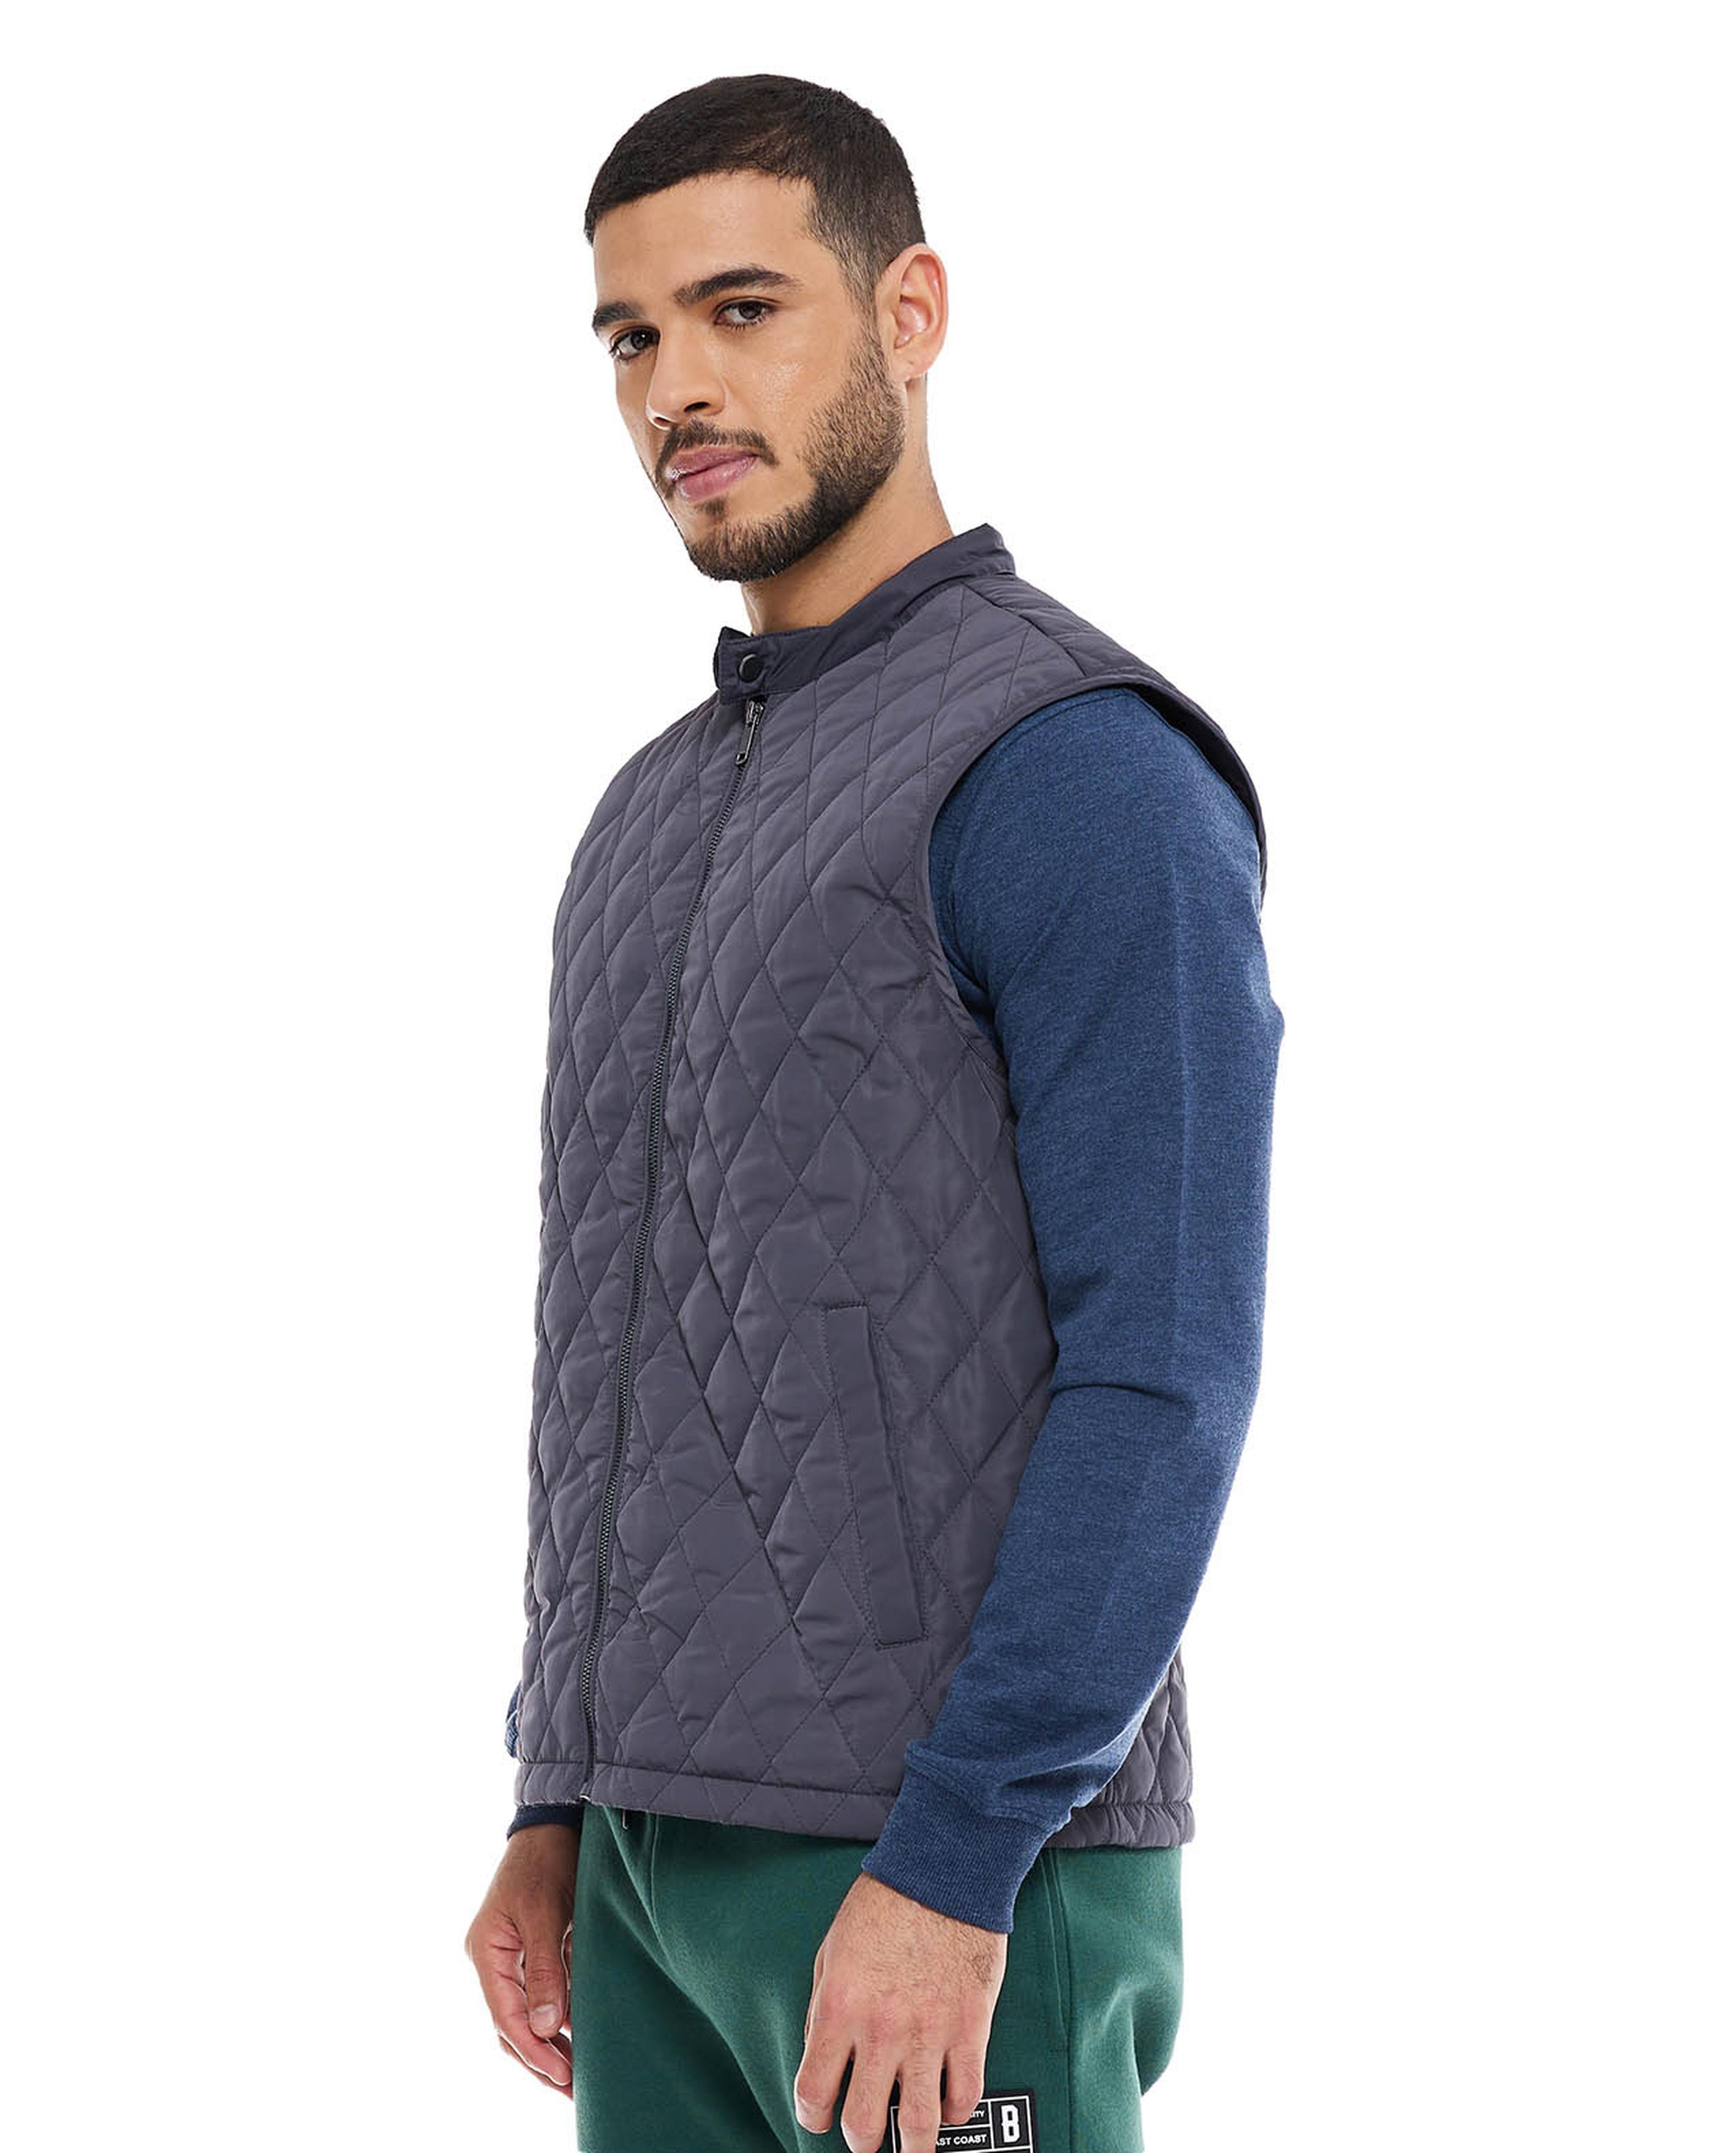 Quilted Vest Jacket with Zipper Front